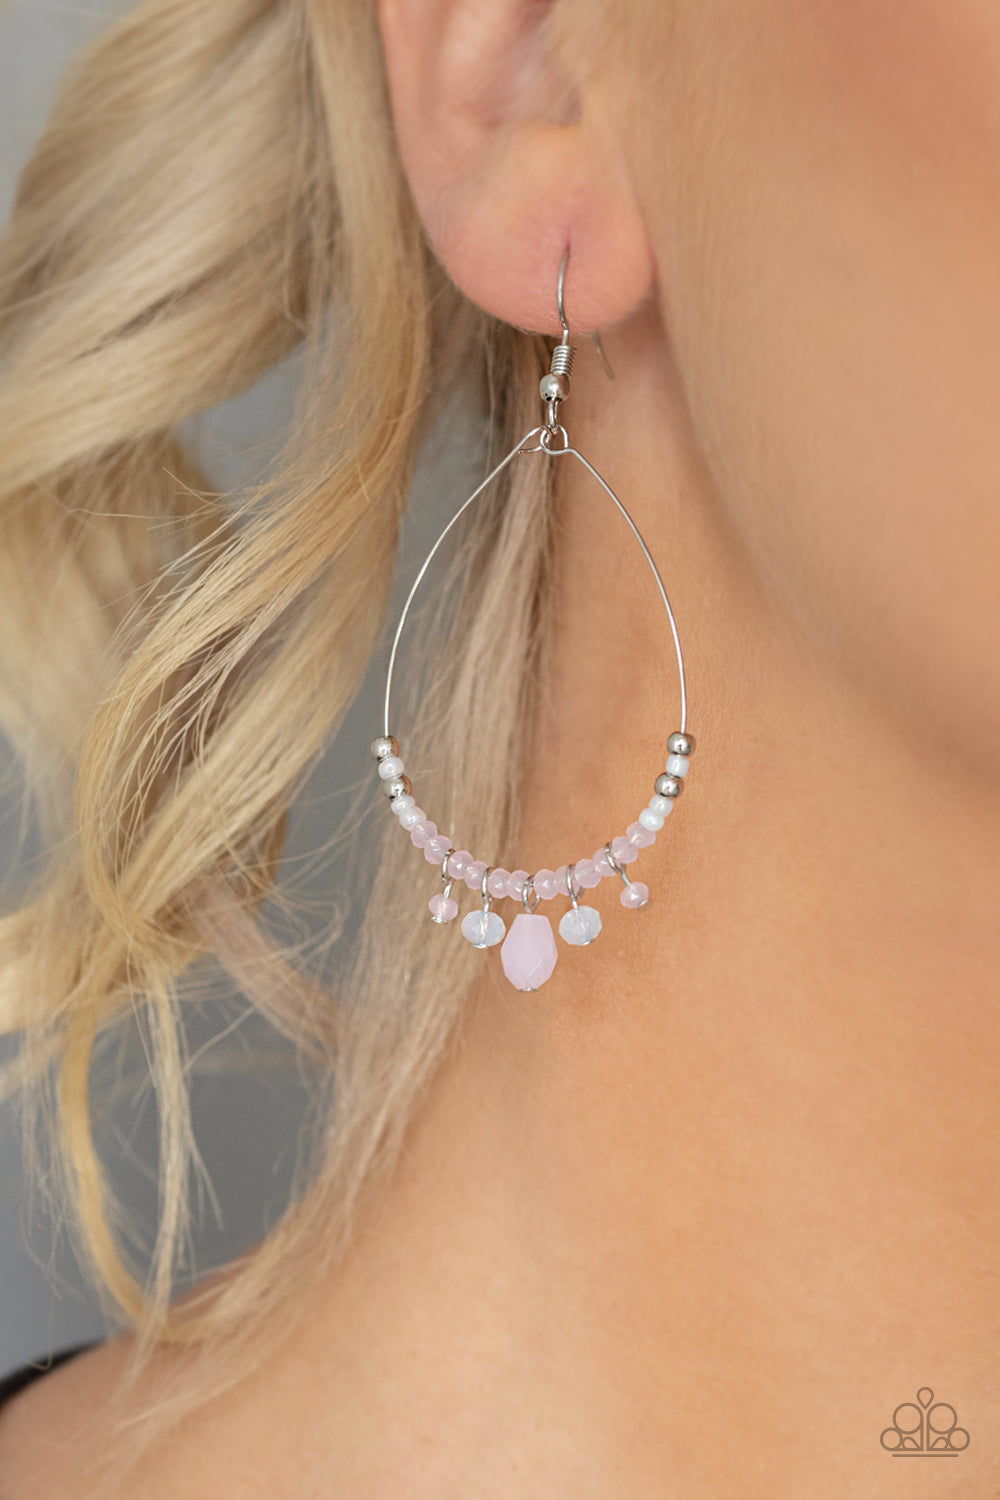 EXQUISITELY ETHEREAL - PINK IRIDESCENT BEADS WIRE HOOP DAINTY EARRINGS